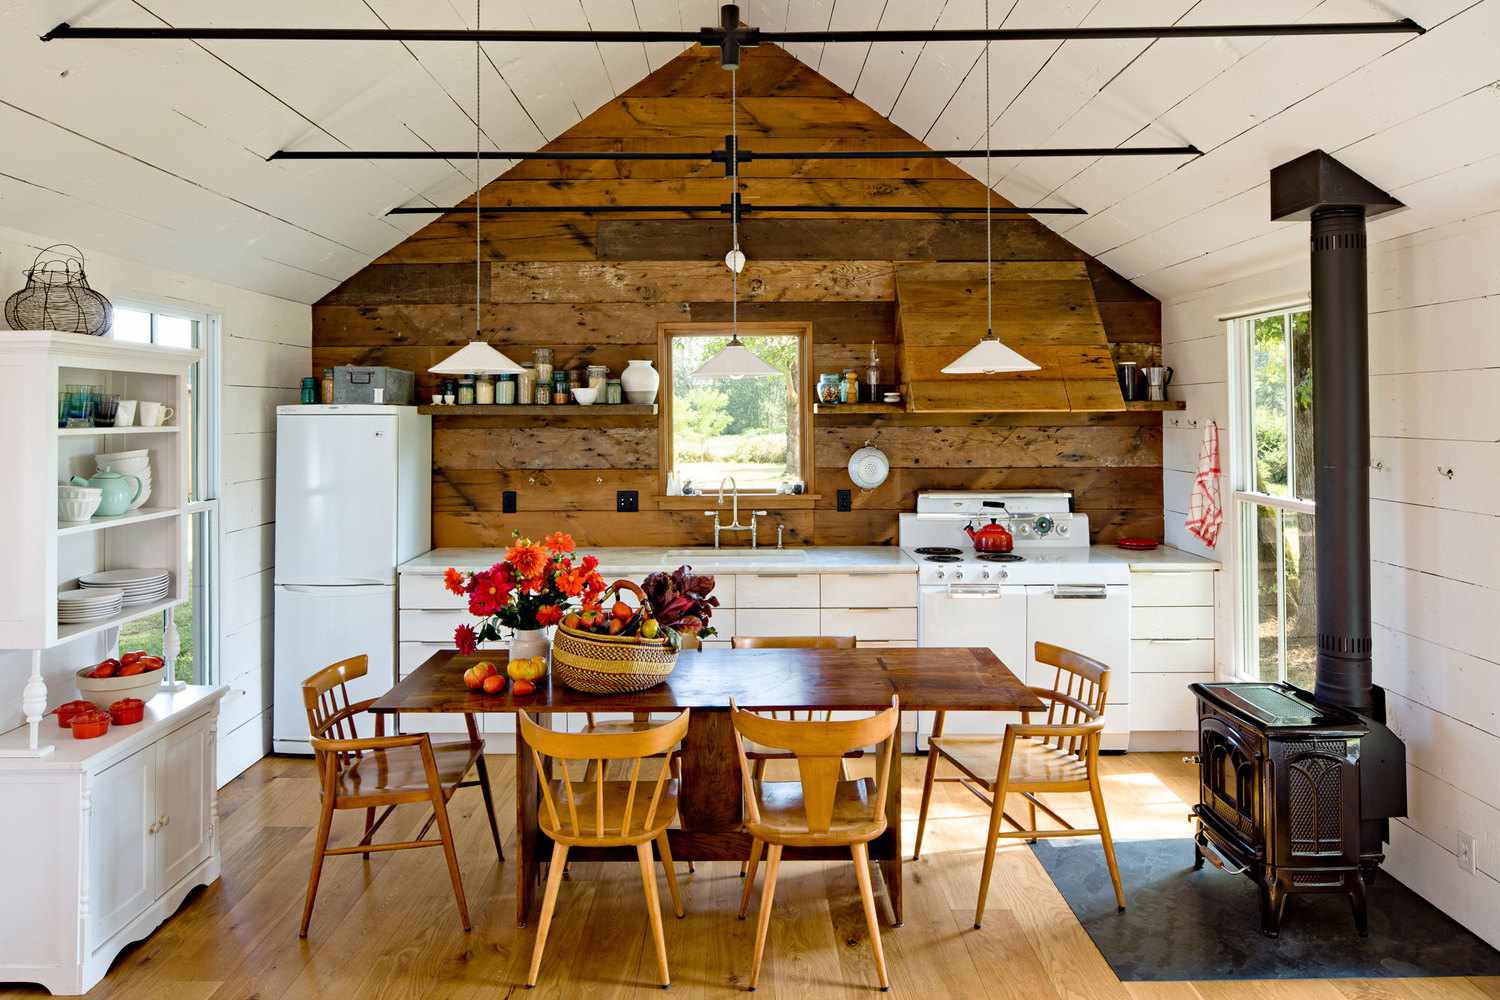 Cottage Kitchen Ideas: 21 Pretty Ways To Decorate Home Spaces